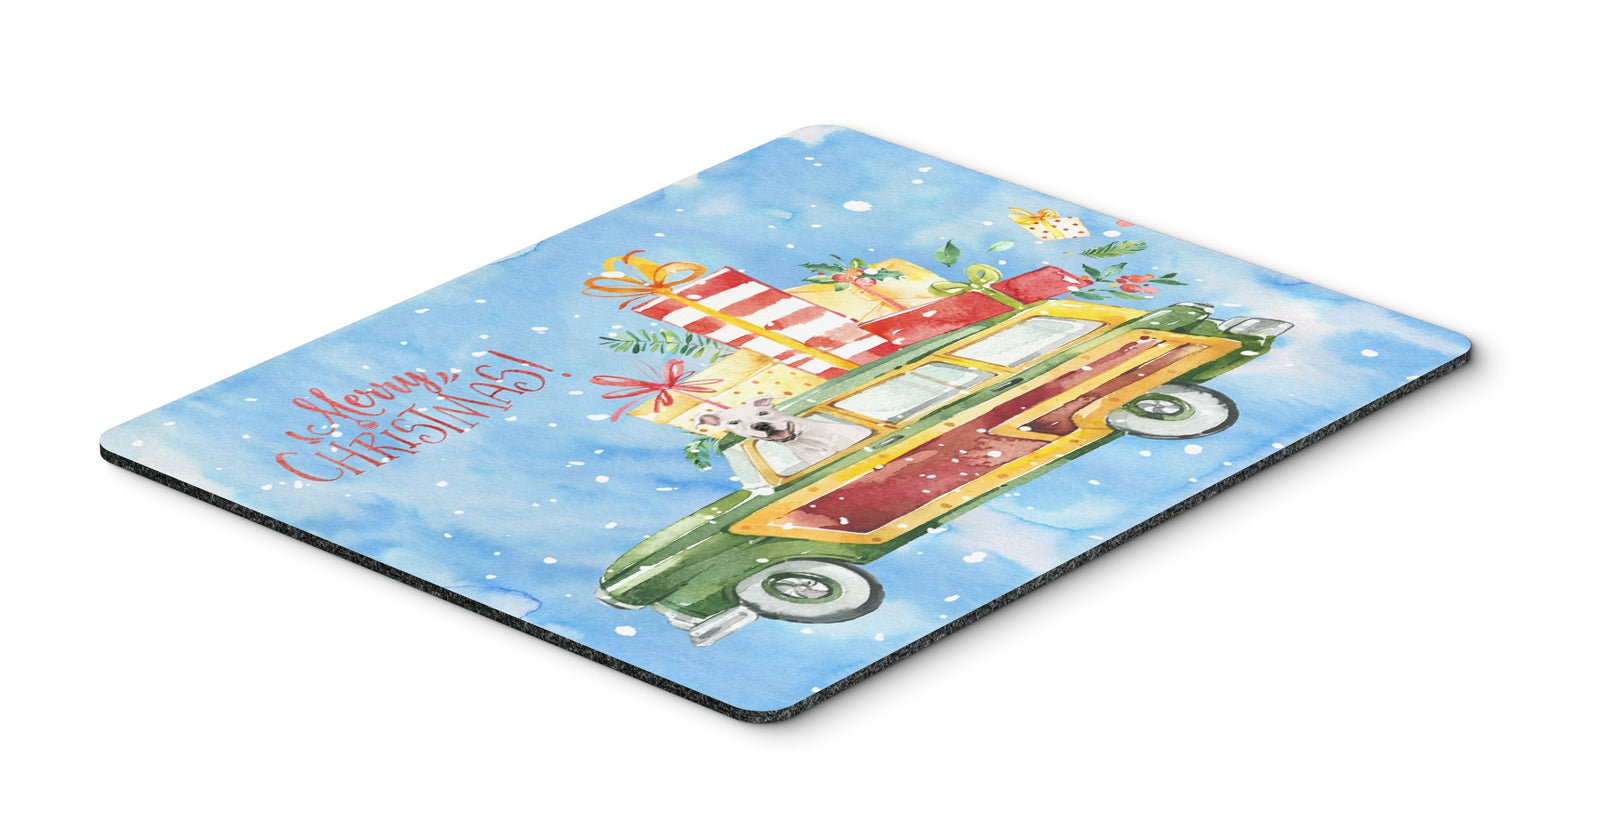 Merry Christmas White Staffordshire Bull Terrier Mouse Pad, Hot Pad or Trivet CK2433MP by Caroline's Treasures